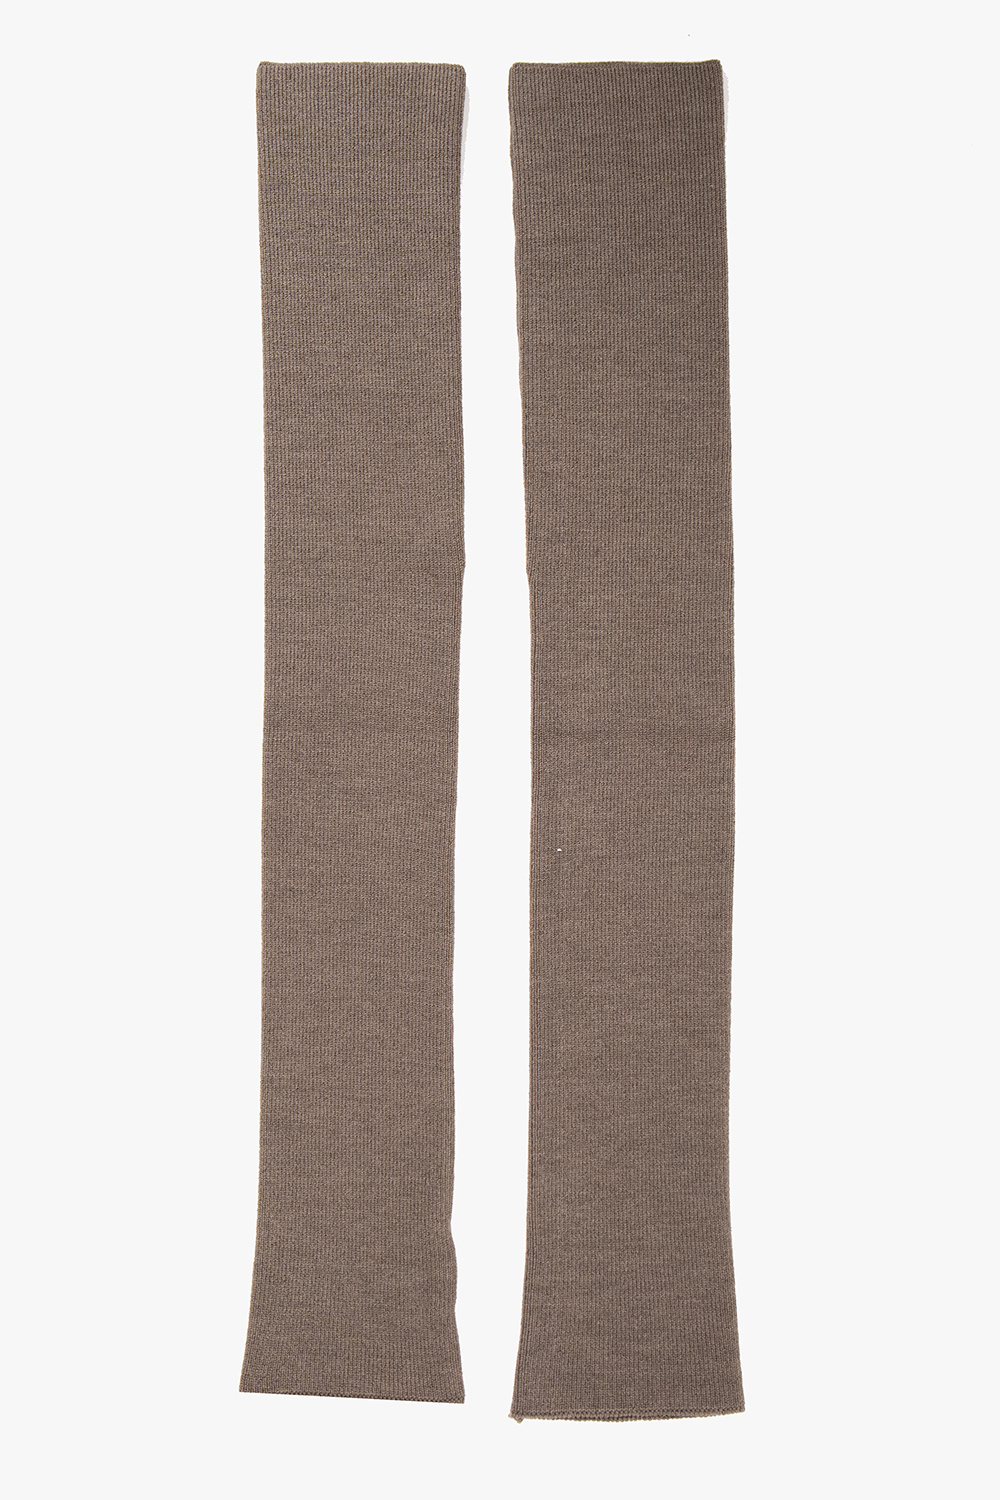 StclaircomoShops | Lemaire Ribbed gaiters | Women's Clothing 